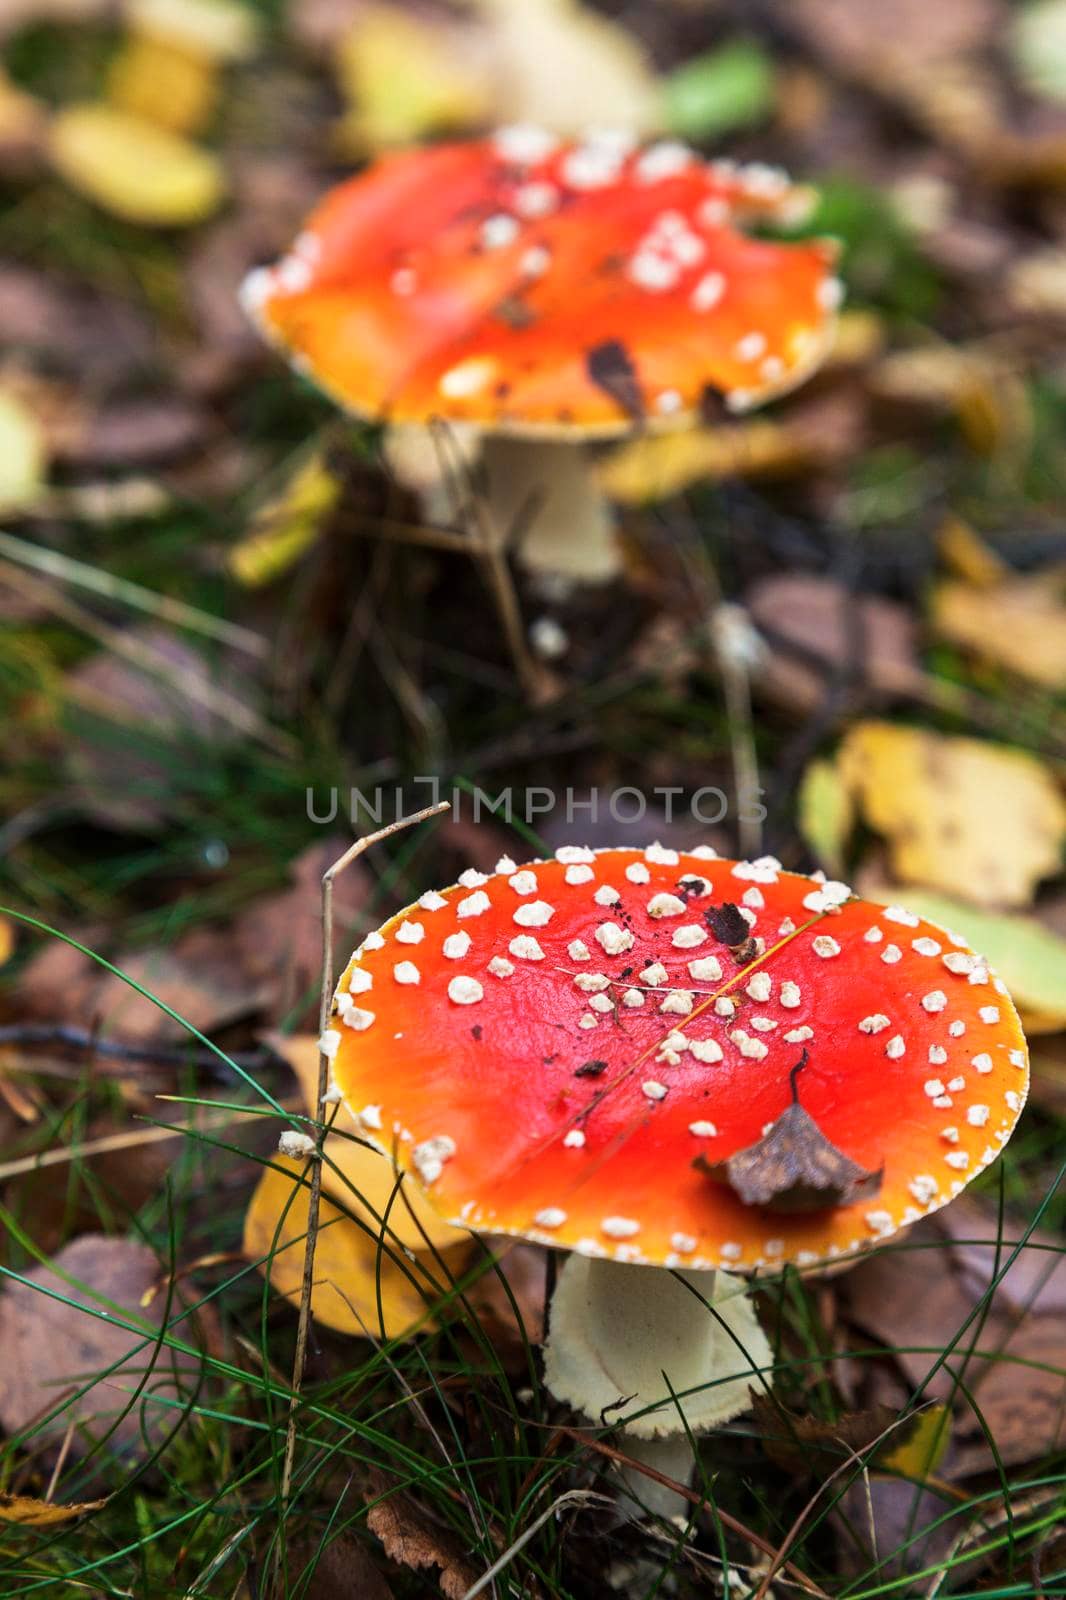 Amanita muscaria seen in Wolin National Park by benkrut